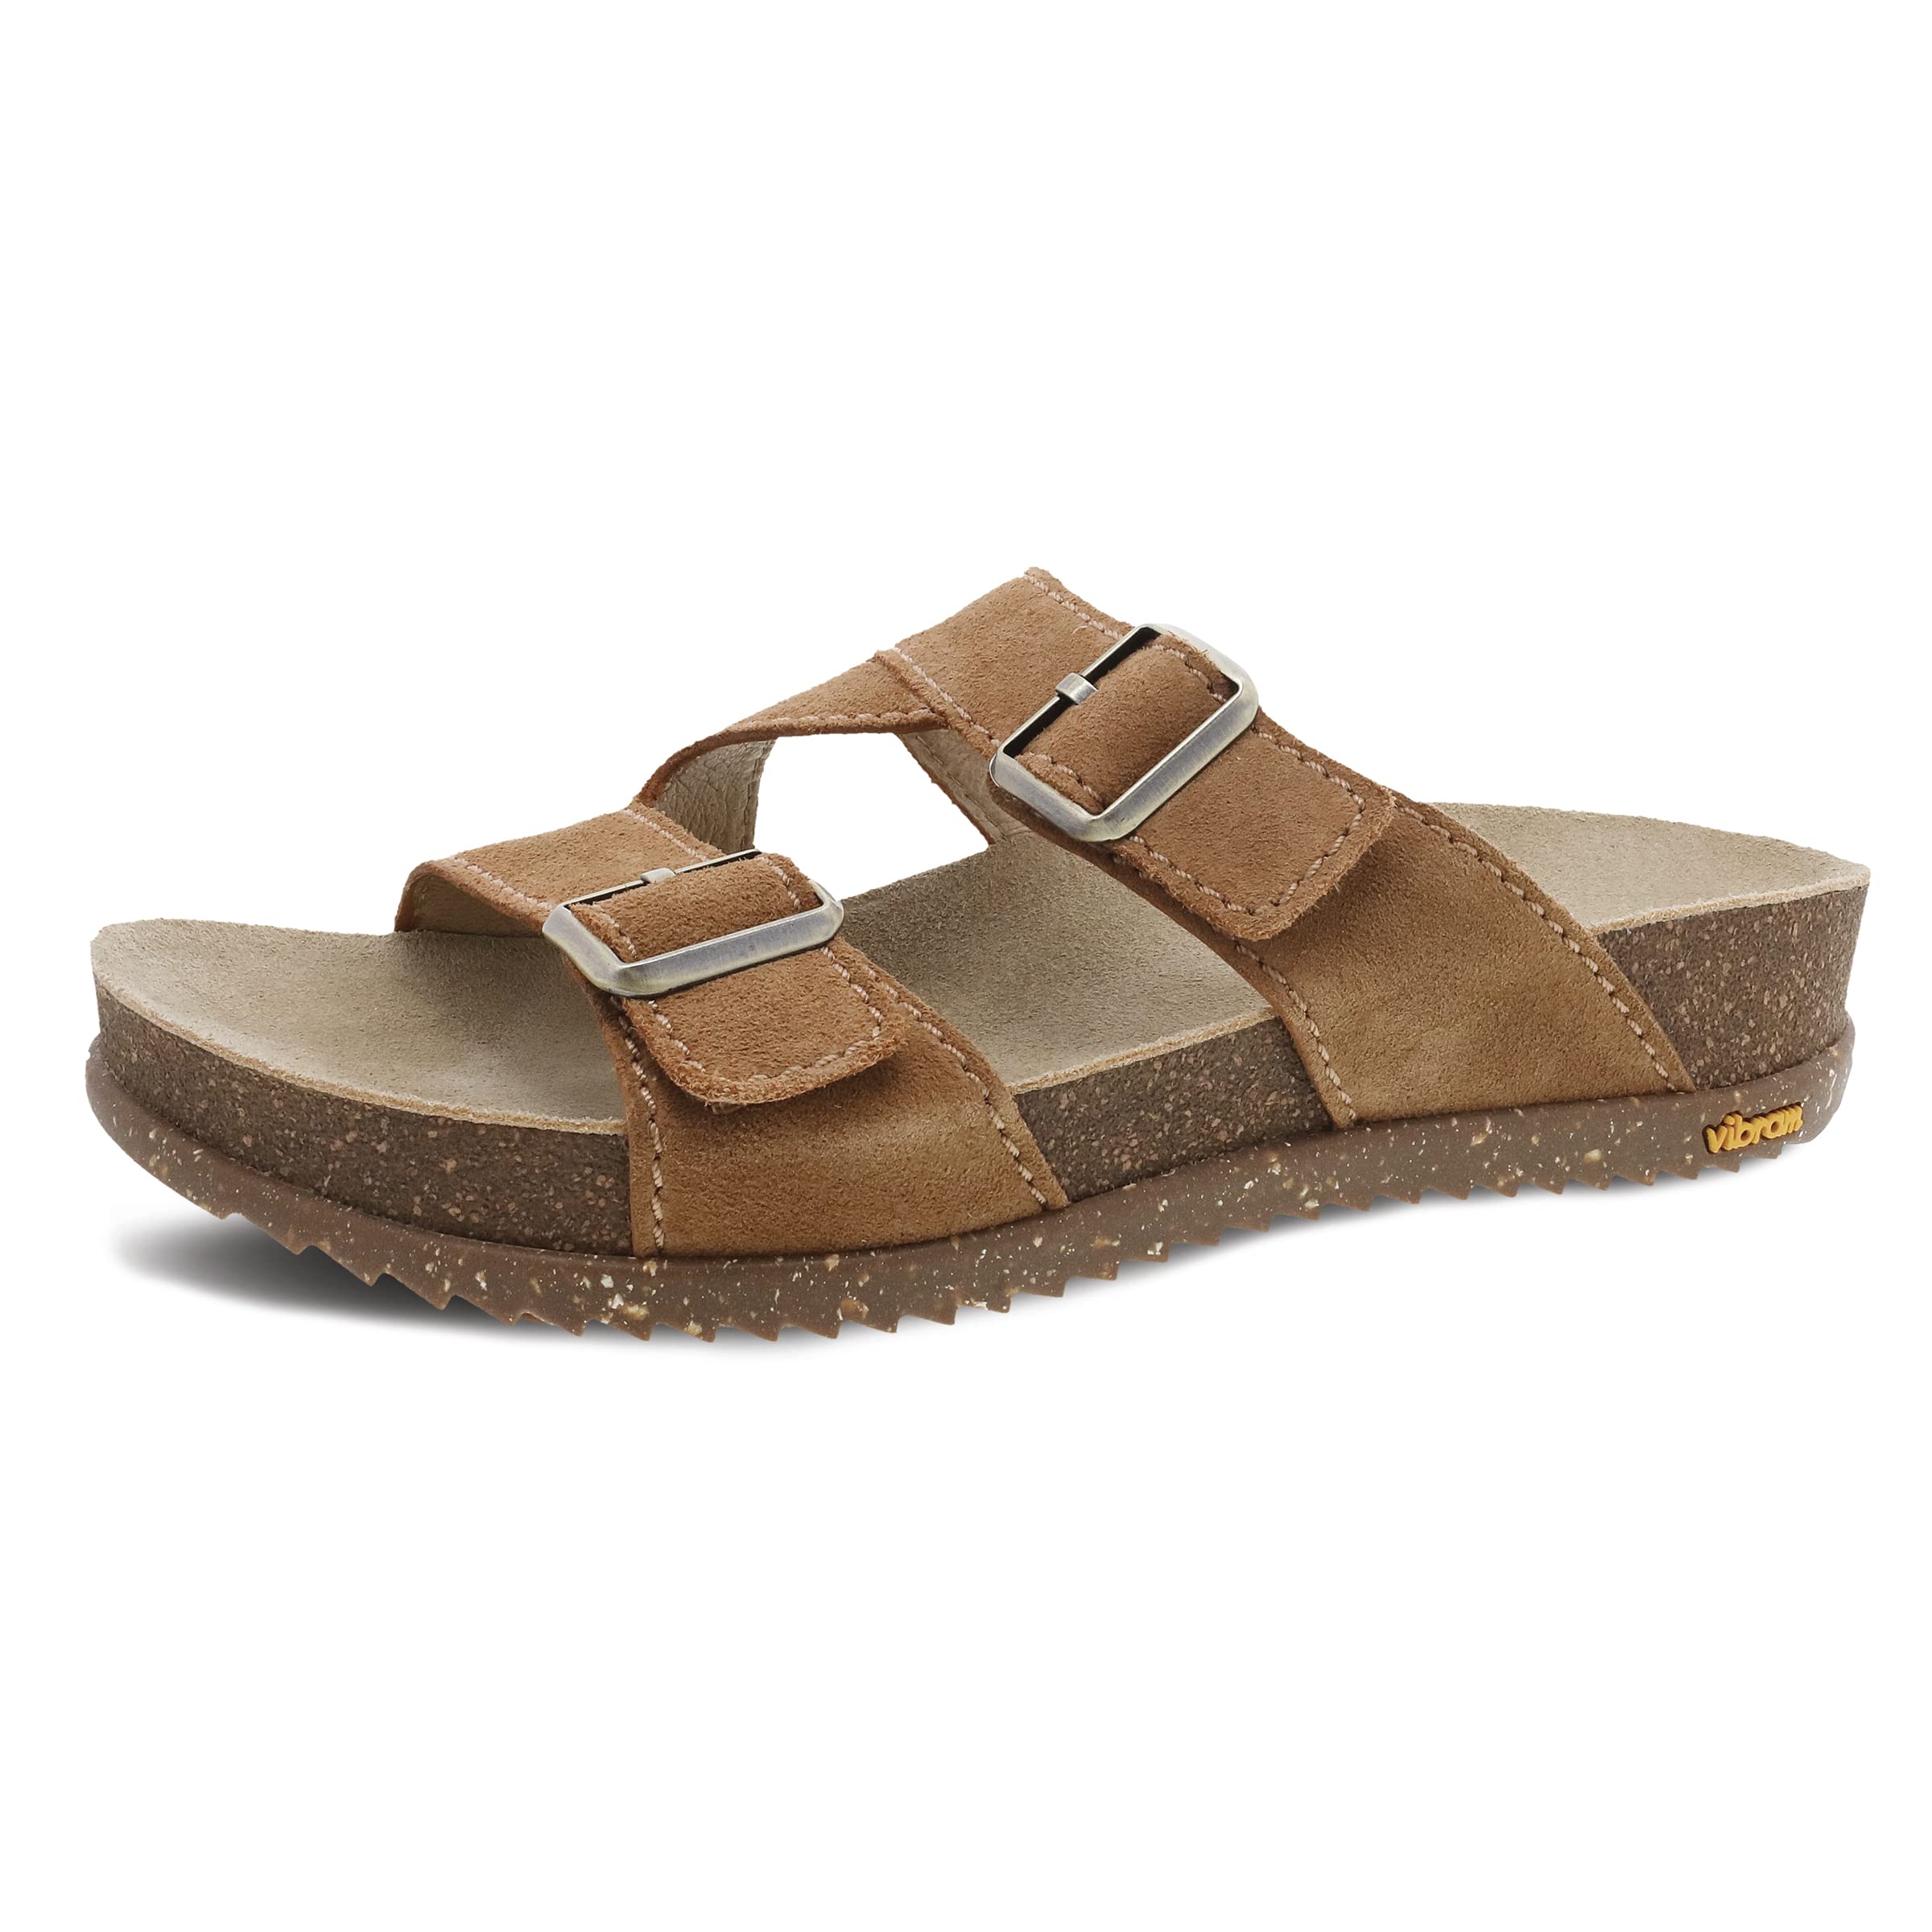 Dansko Dayna Double Buckle, Slip-On Suede Sandal for Women – Cushioned, Contoured Cork midsole for Comfort and Shock Absorption – Vibram ECOSTEP EVO Rubber Outsole For Long-Lasting Wear